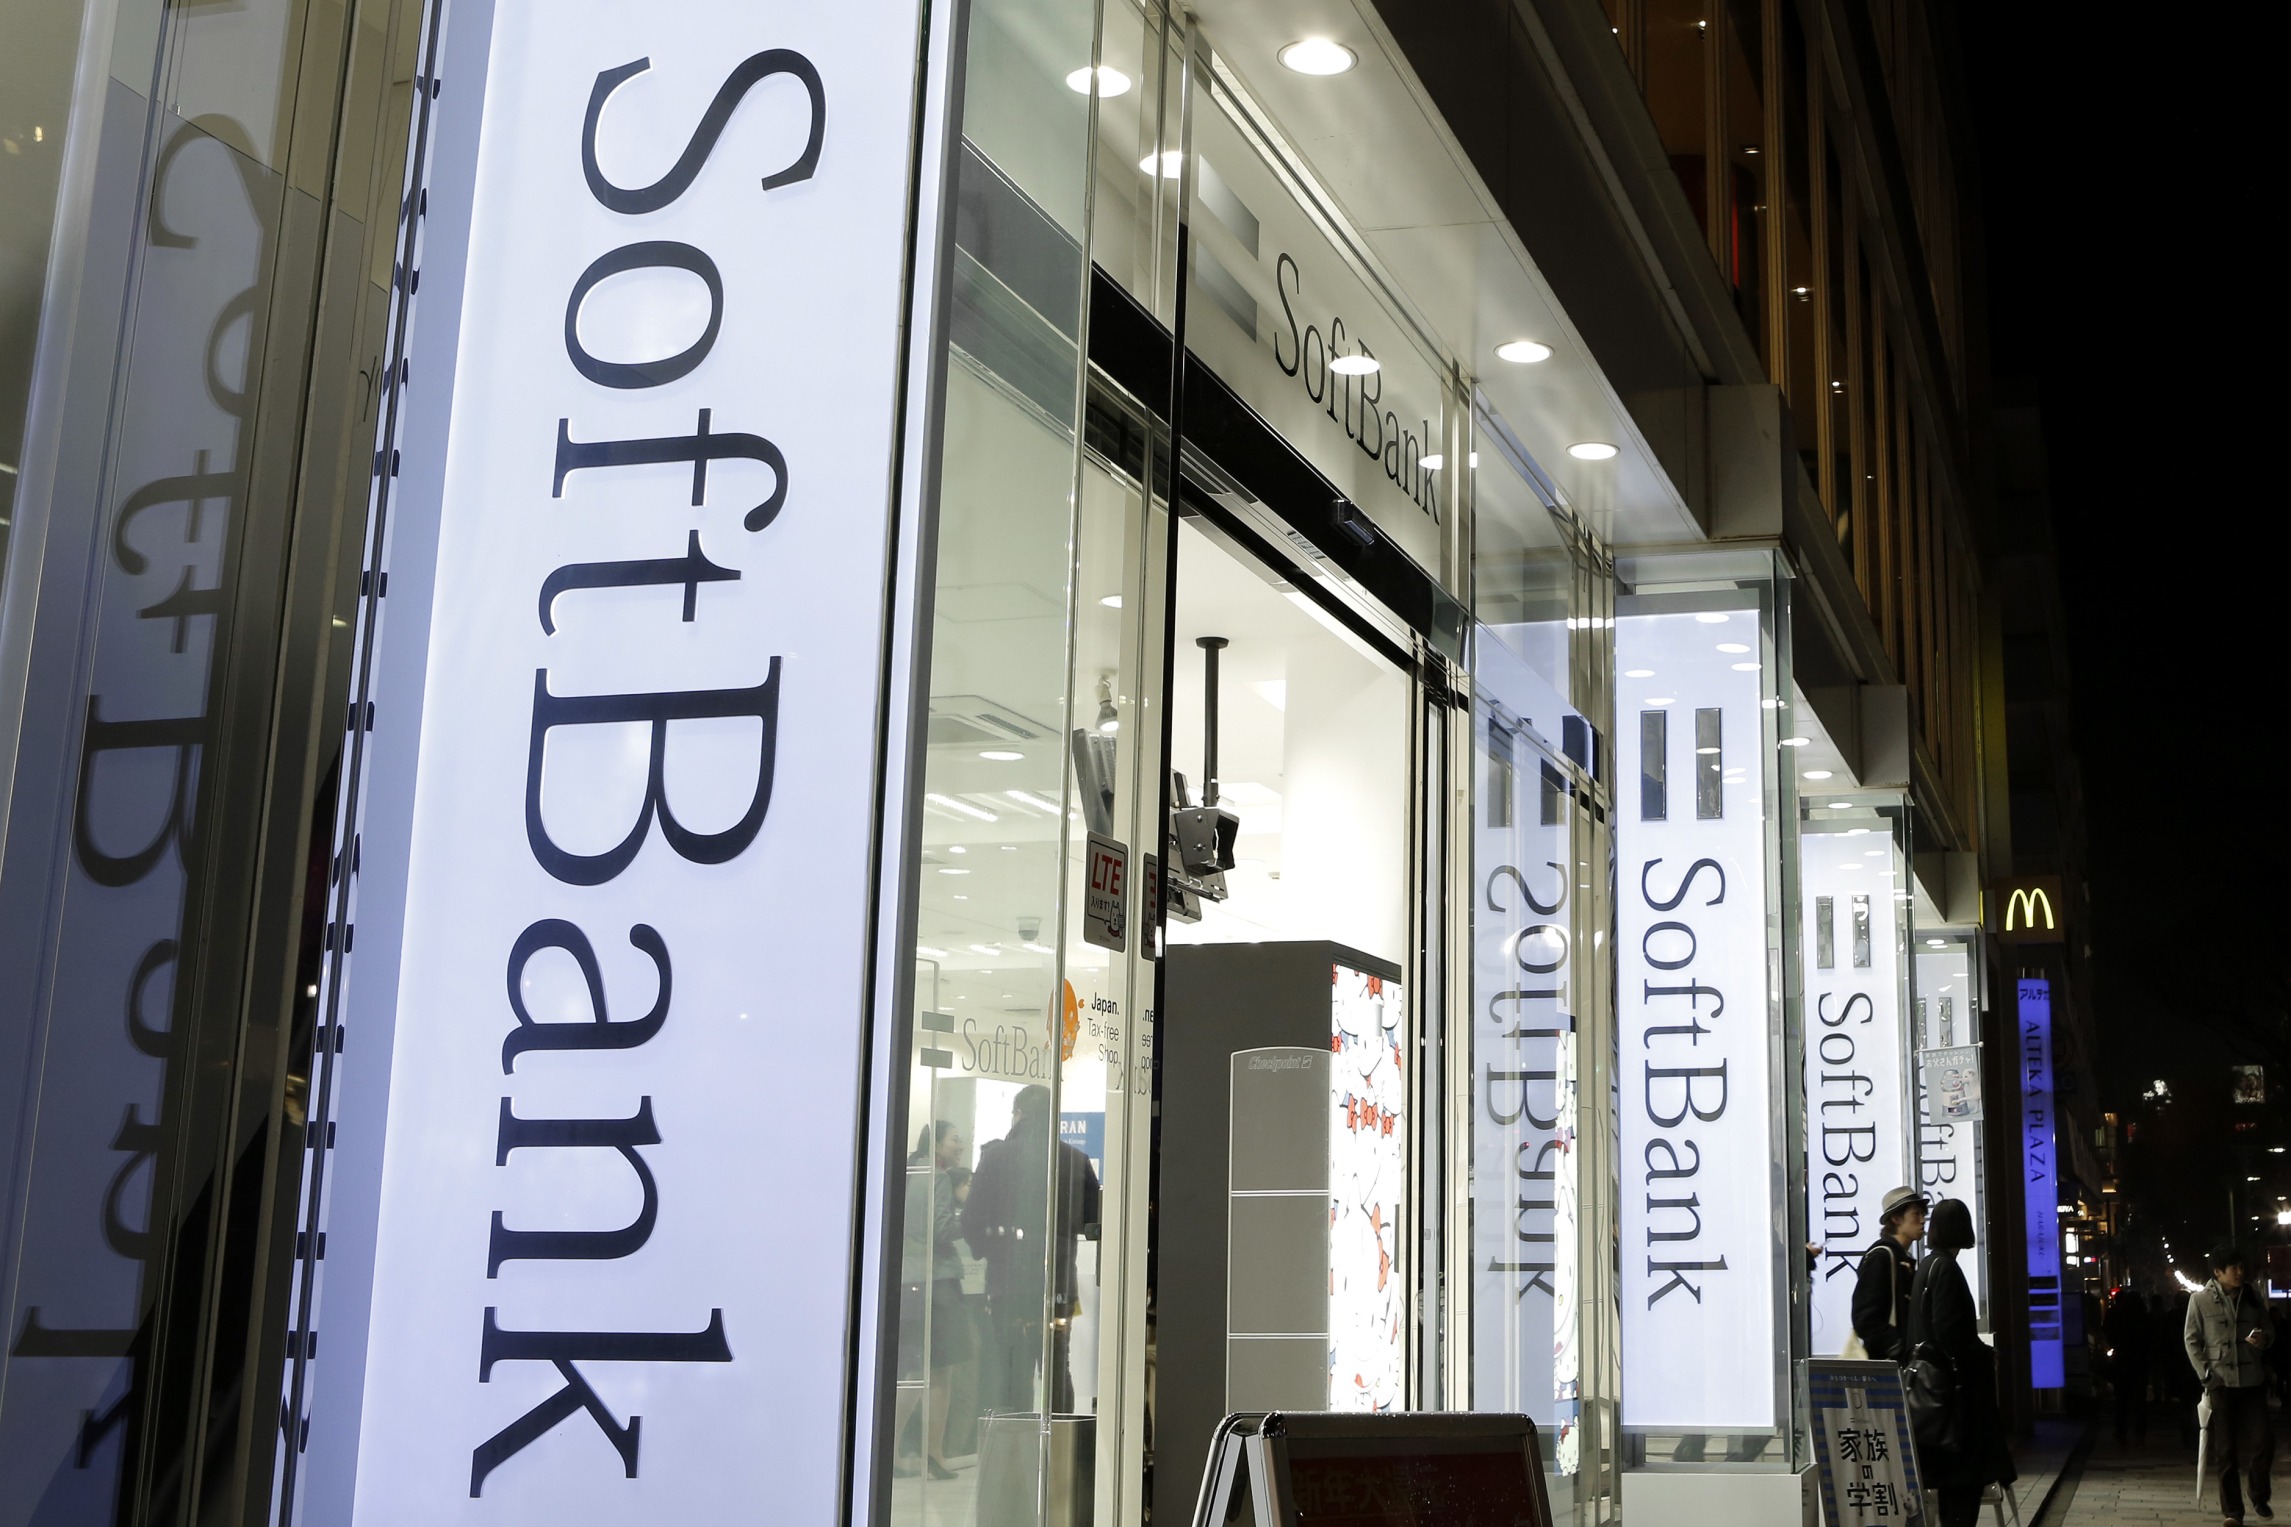 Customers exit a SoftBank Corp. store at night in Tokyo, Japan, on Sunday, Feb. 8, 2015. SoftBank, the Japanese wireless carrier led by billionaire Masayoshi Son, is scheduled to report third-quarter earnings on Feb. 10.